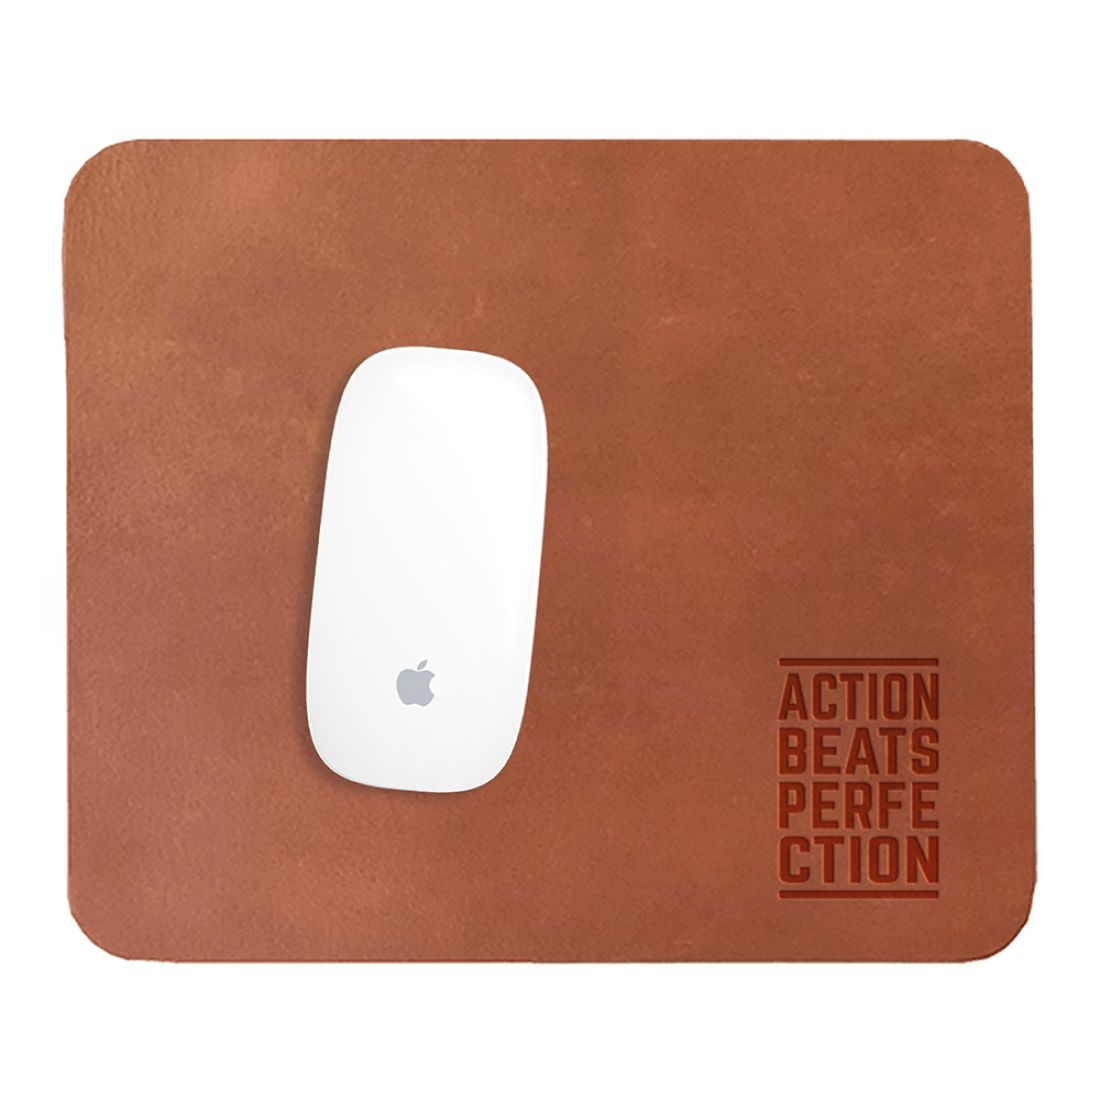 Handmade Mouse Pad Leather Mousepad / BROWN Customized Gift Mouse Pad Leather Mouse Pad Personalized Mouse Pad Leather Desk Mat